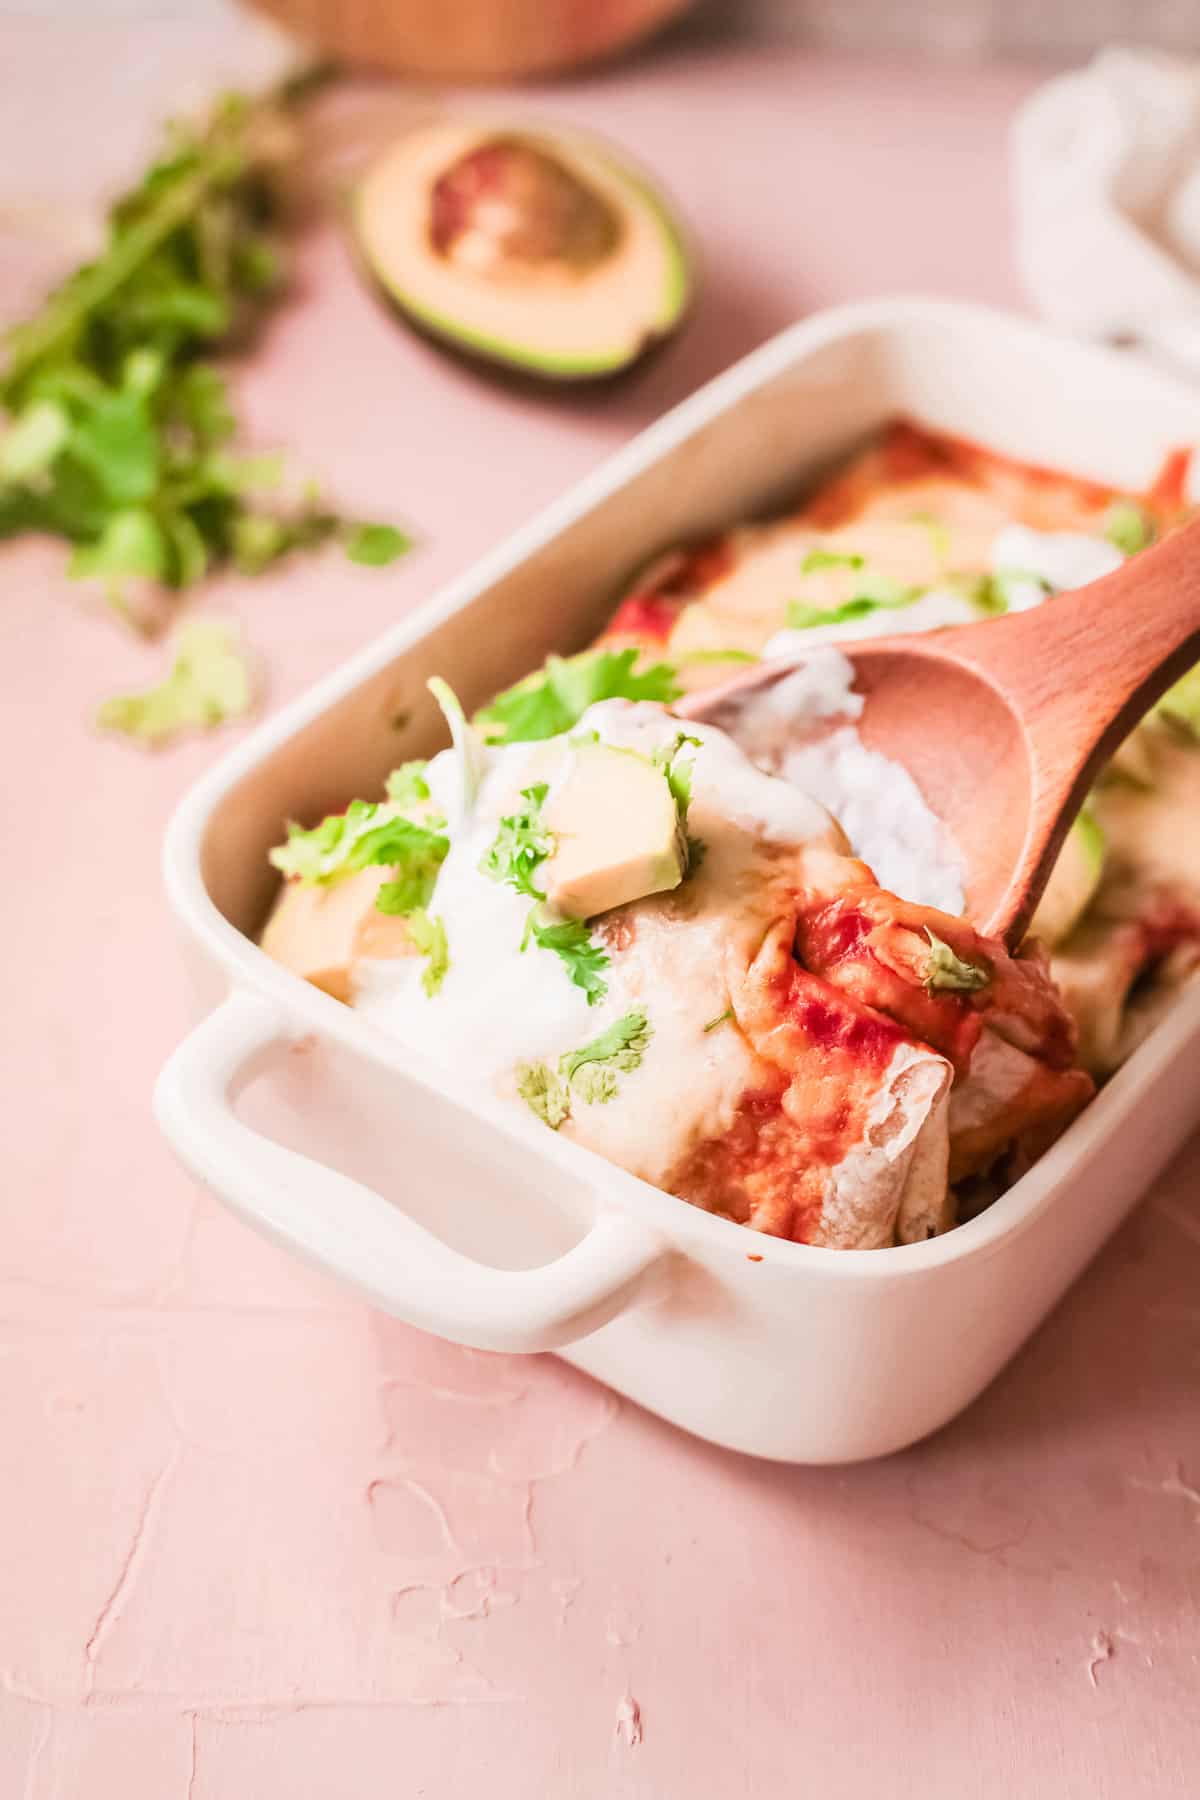 a wooden spoon scooping a portion of slow cooker chicken enchilada casserole out of the baking dish